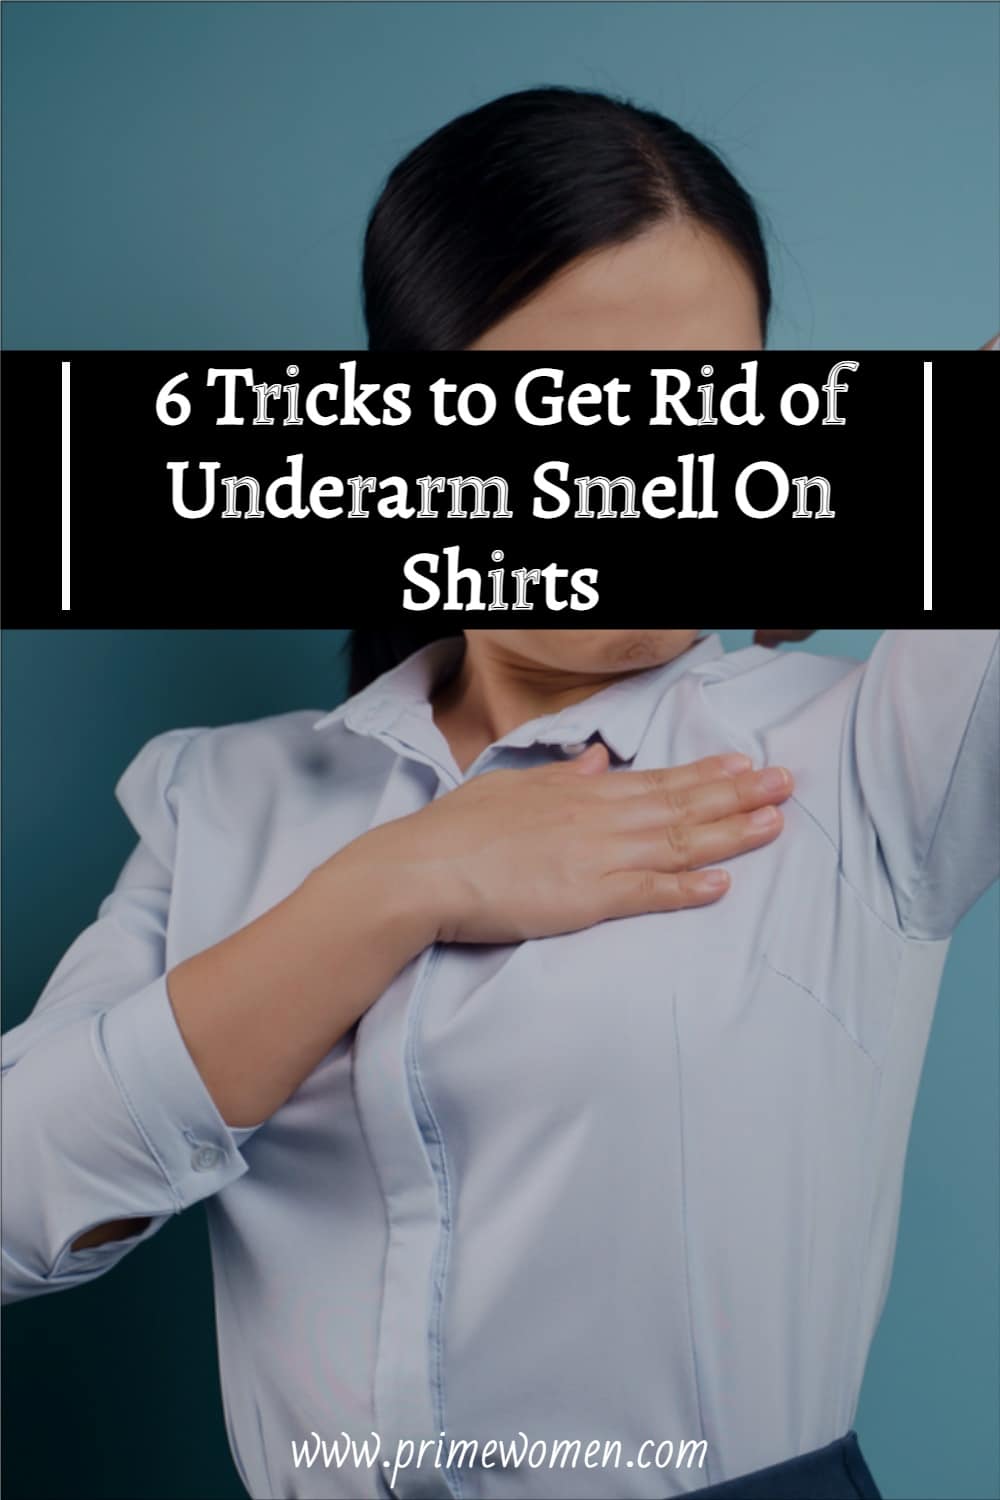 6-Tricks-to-Get-Rid-of-Underarm-Smell-On-Shirts